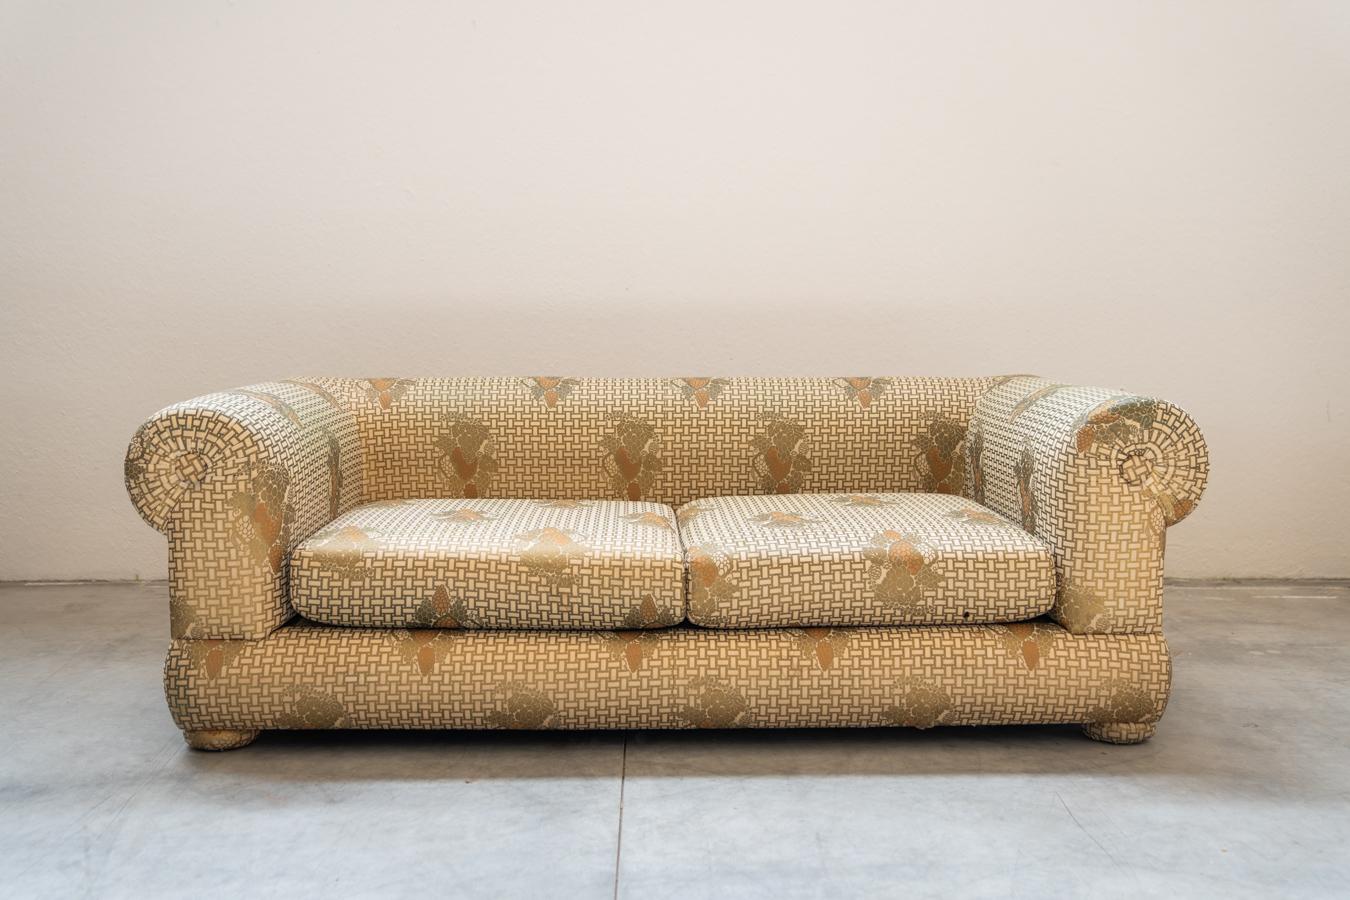 Silk 3-seater sofa and armchair, Tommaso Barbi, 1970s
Elegant, very sturdy. Only a few slight tears on the base, burns, and slight stains on the fabric.
DESIGN PERIOD            1970s
PRODUCTION YEAR           1970s
COUNTRY OF PRODUCTION           